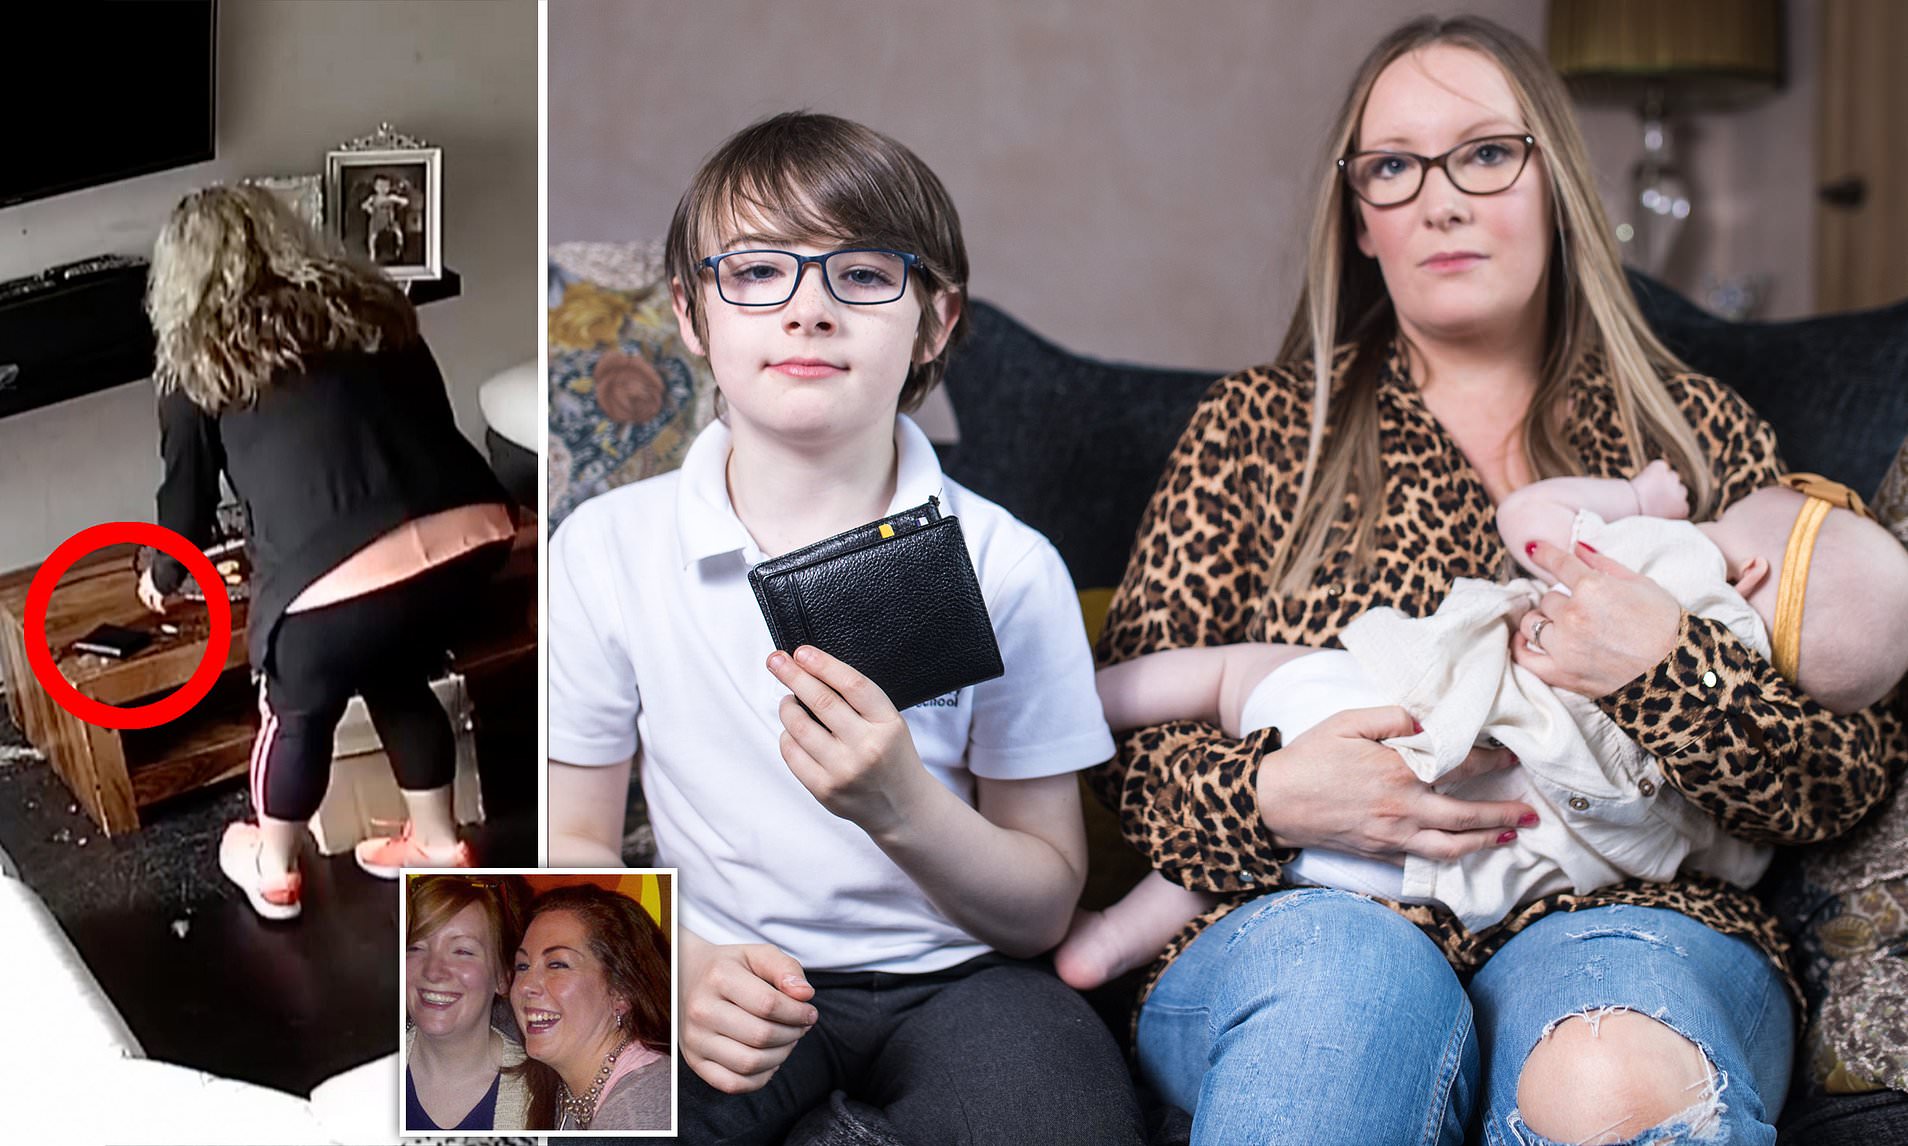 Woman's BEST FRIEND is caught on CCTV stealing cash and rifling through her eight-year-old son's wallet - on hidden camera set up after £1,390 went missing from her home